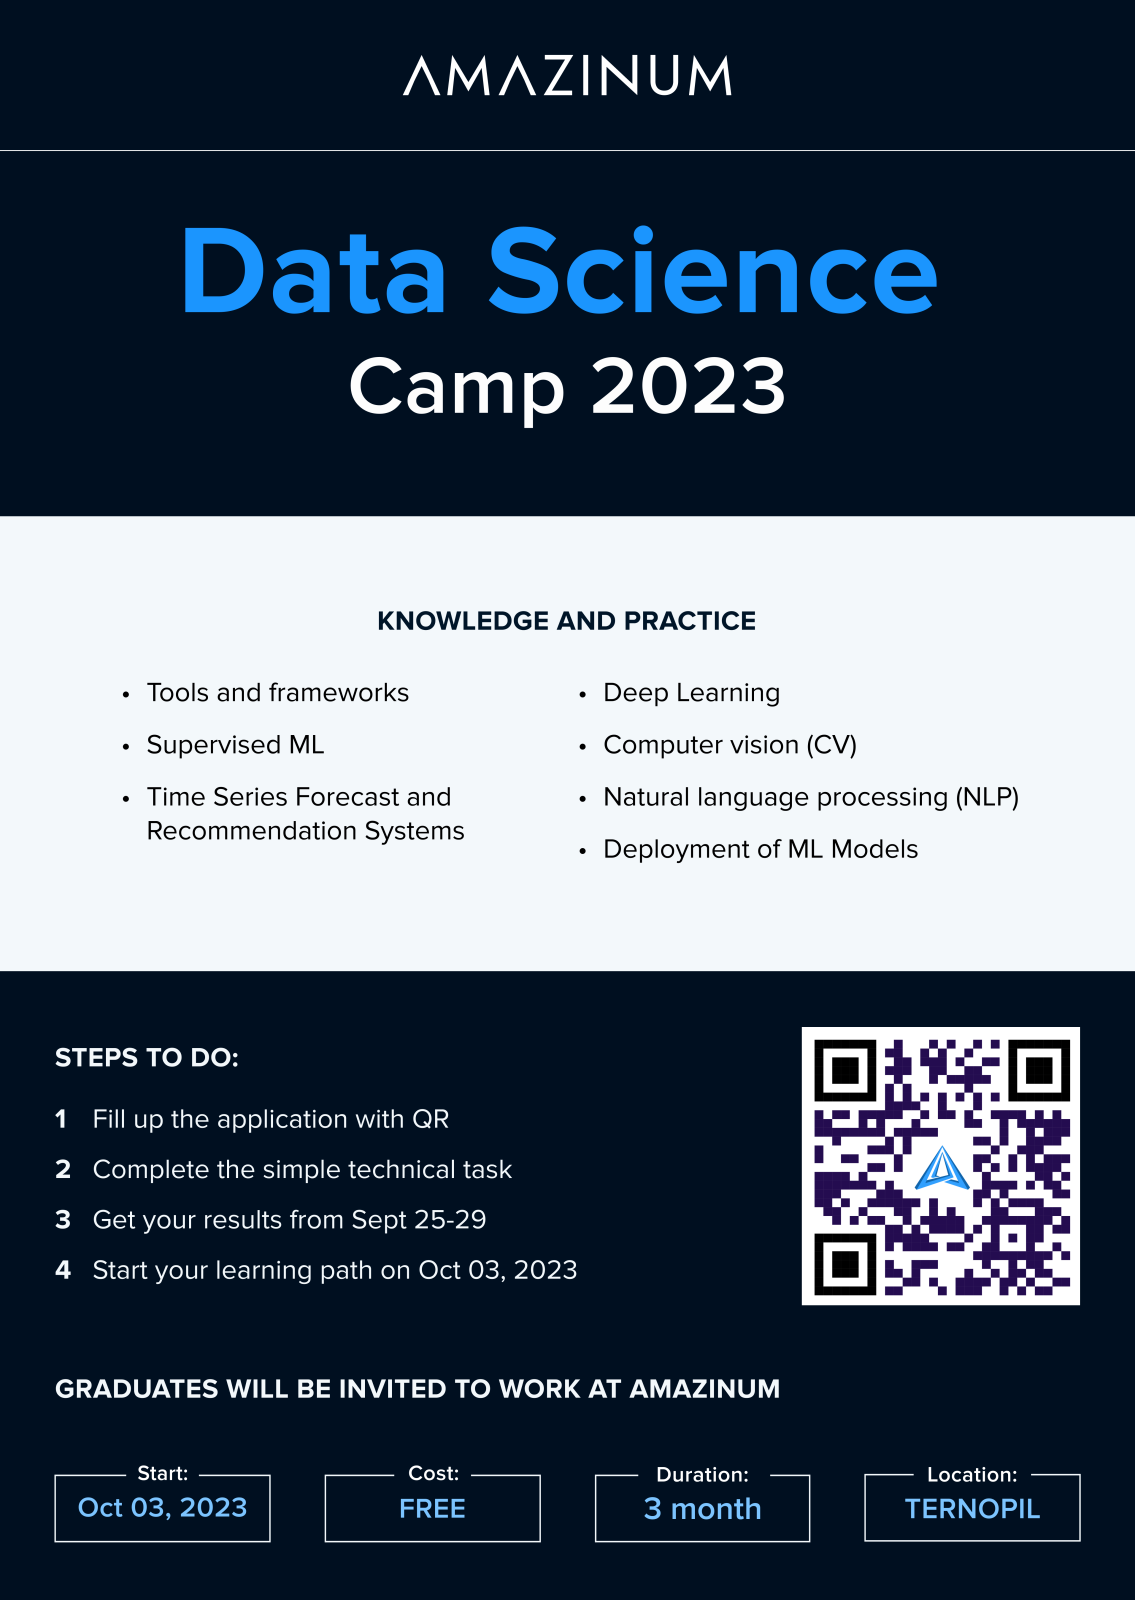 Data Science Camp 2023